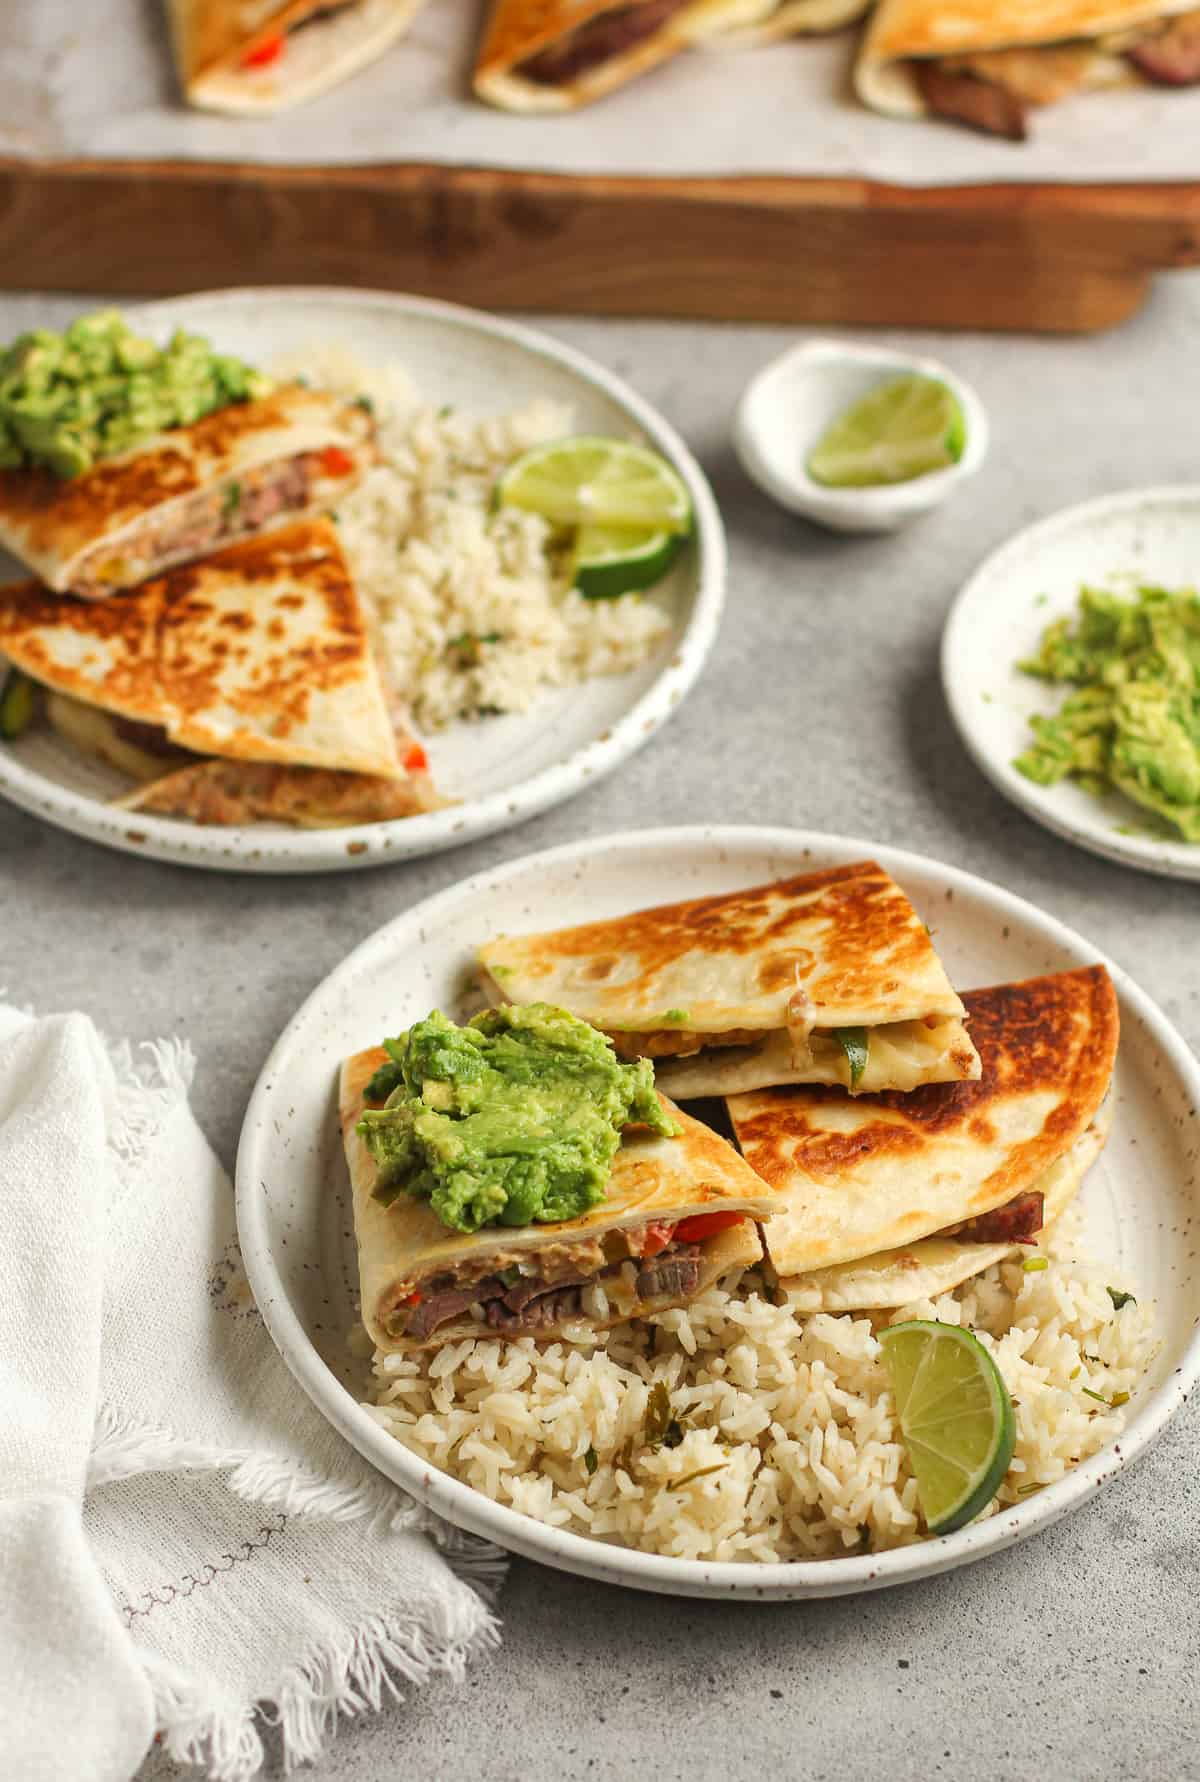 Side shot of two plates of quesadillas and rice.